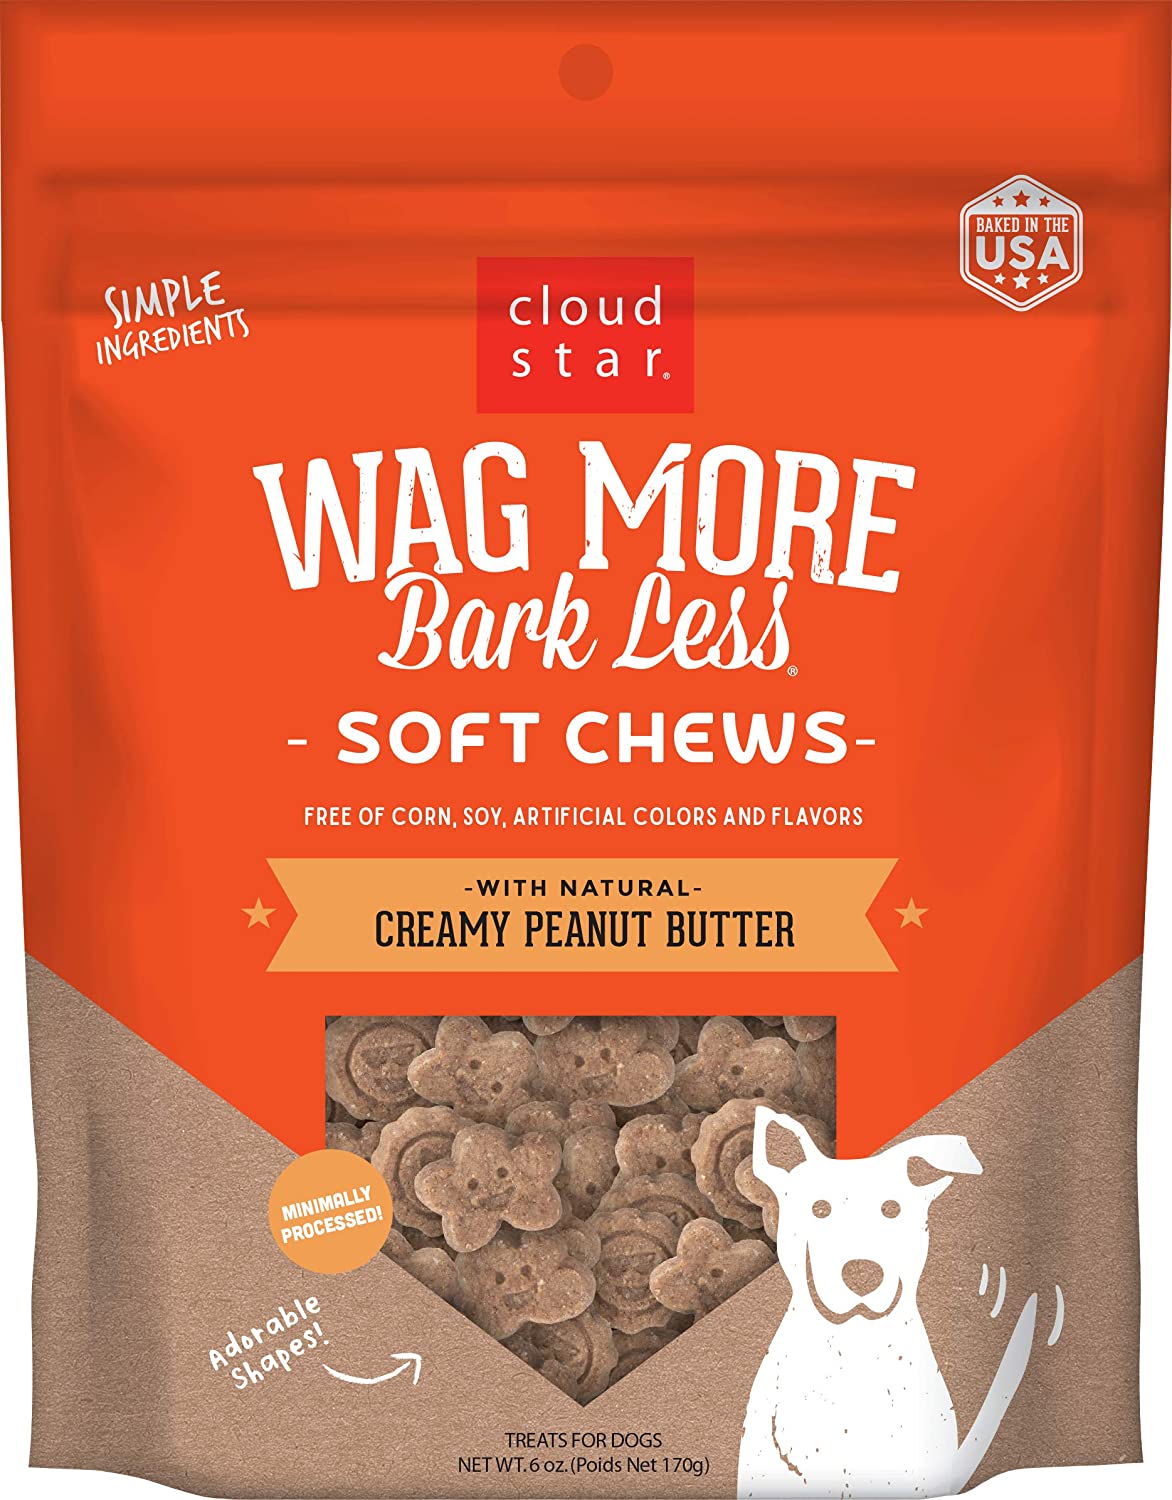 Cloud Star Soft Chews for Dogs Peanut Butter